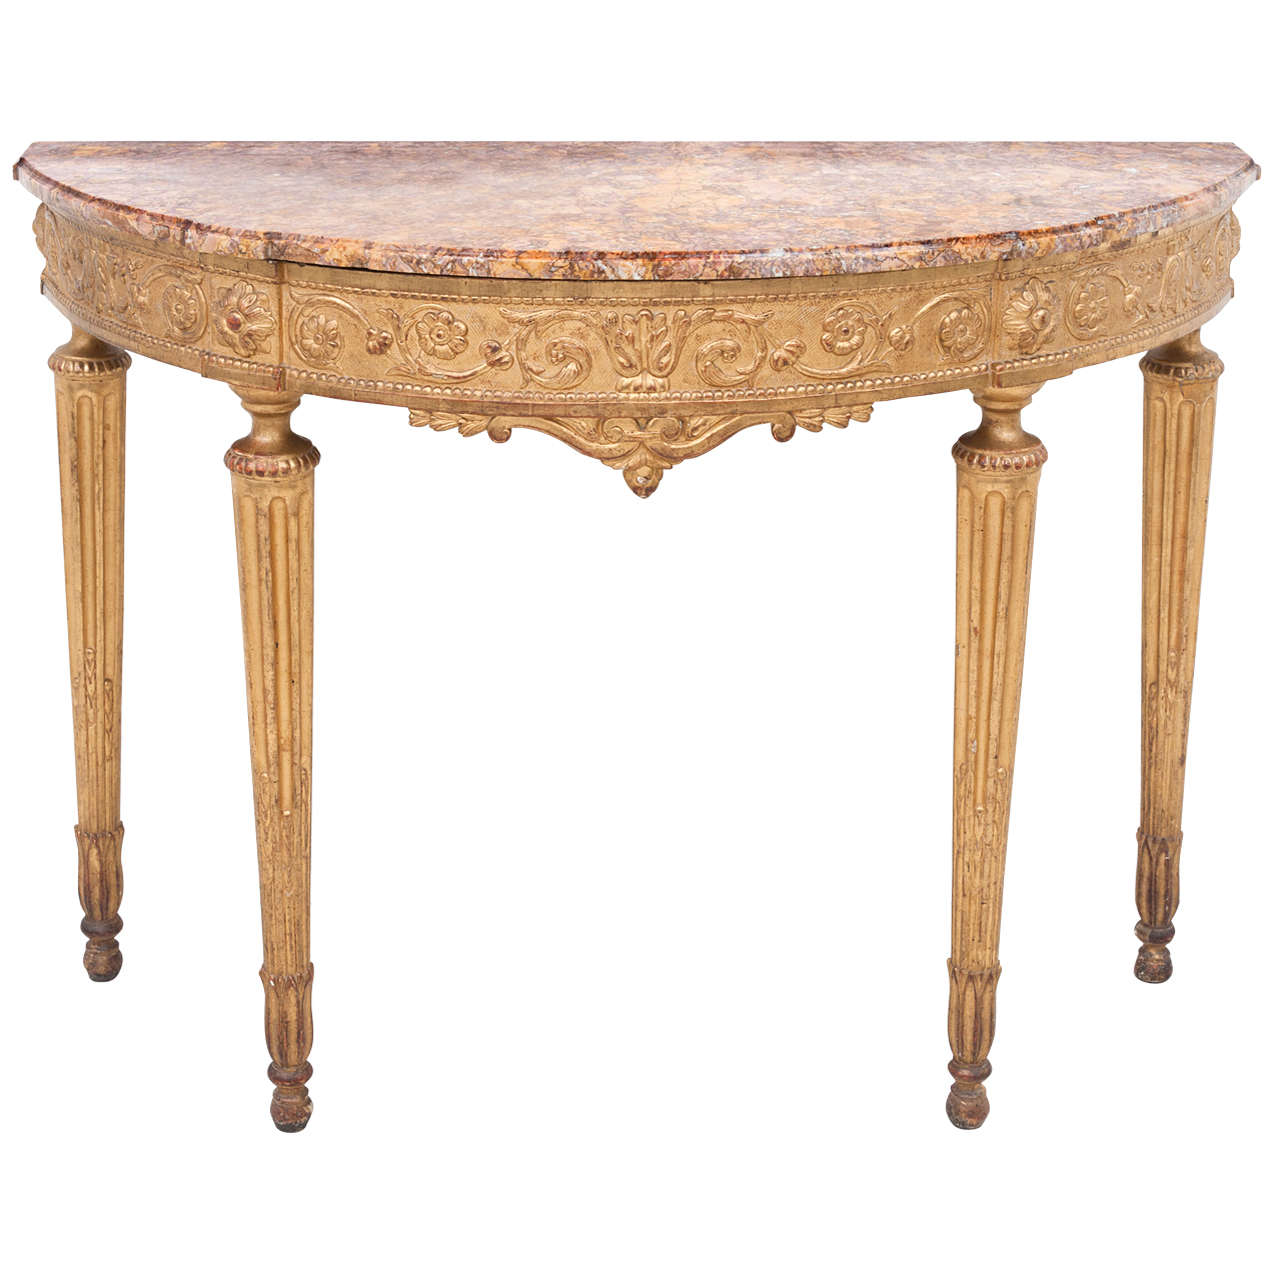 18th Century Italian Genoese Neoclassical Gilded Table For Sale